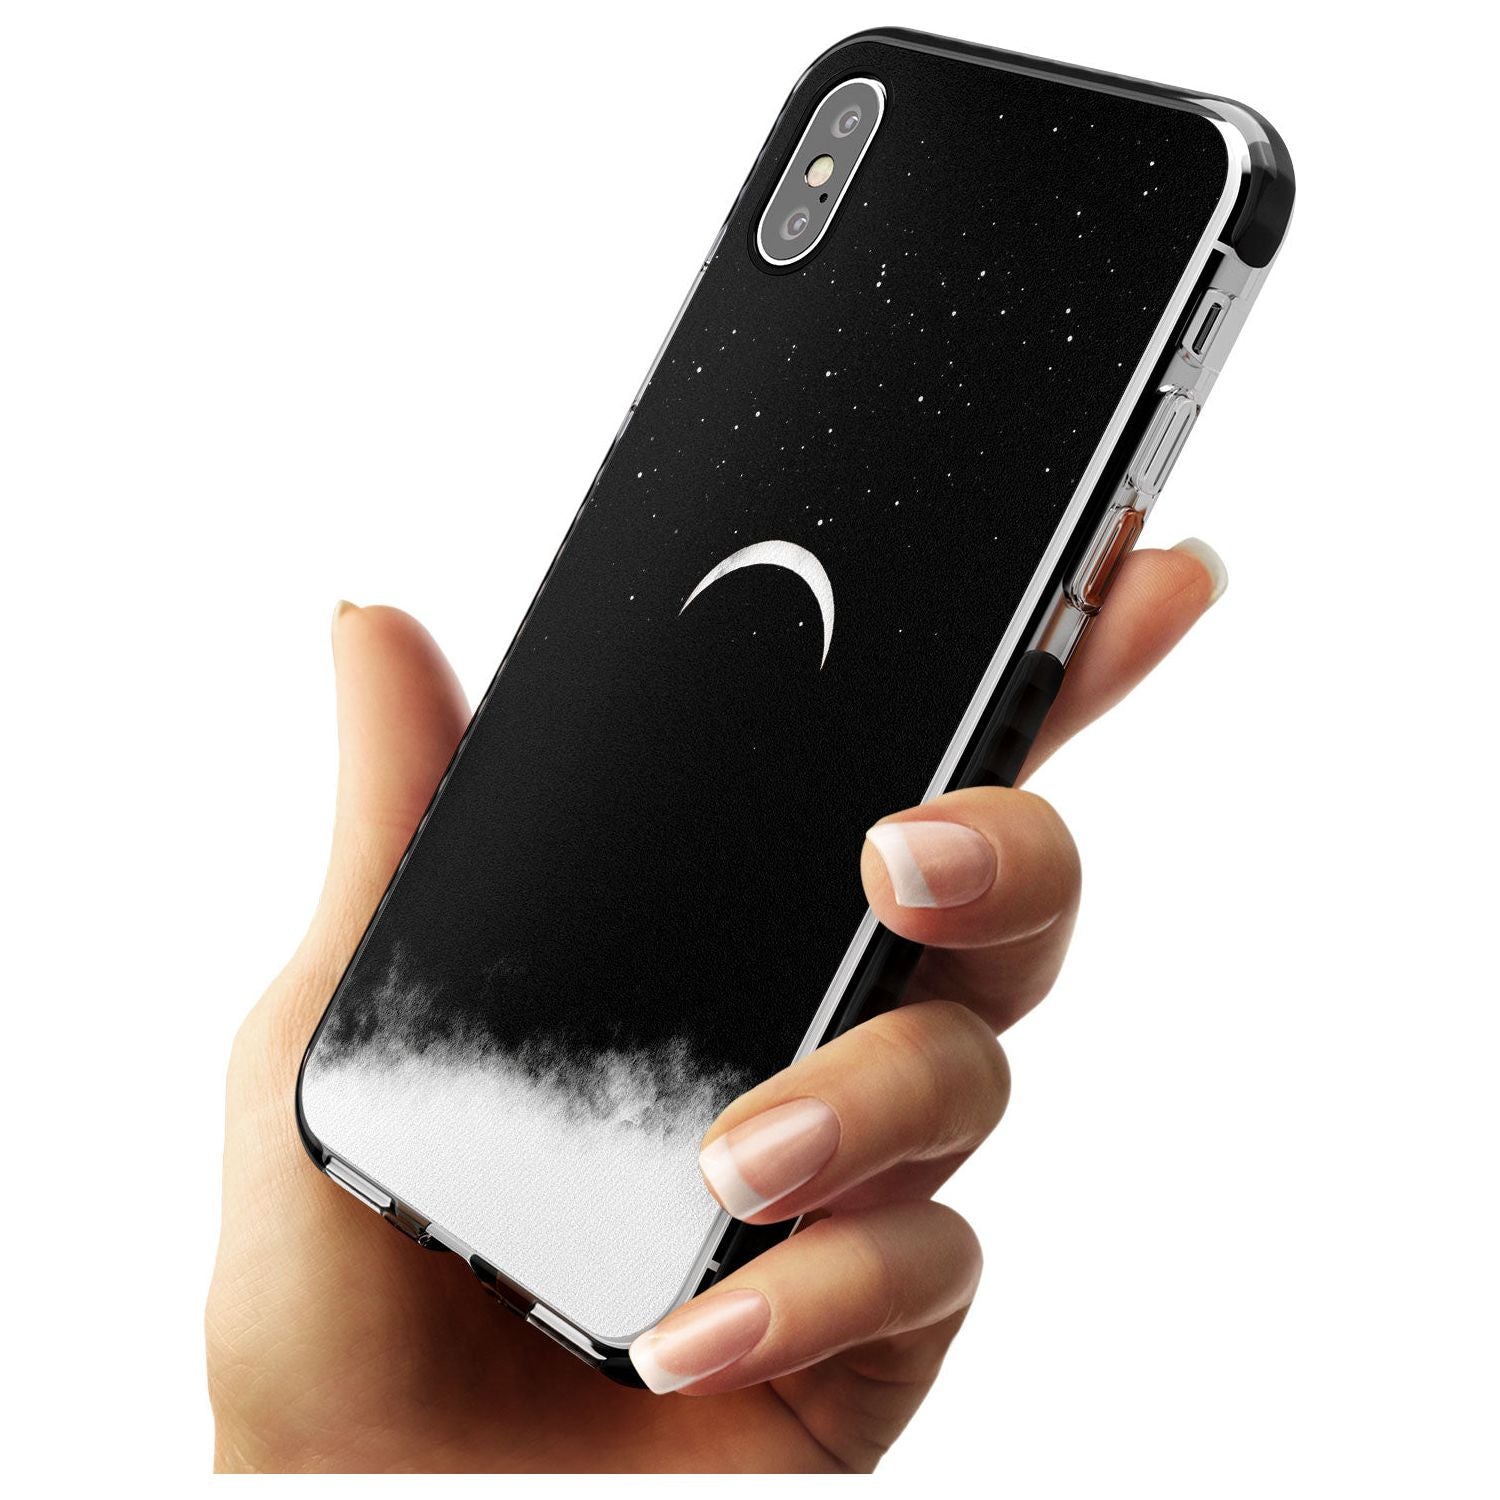 Upside Down Crescent Moon Black Impact Phone Case for iPhone X XS Max XR